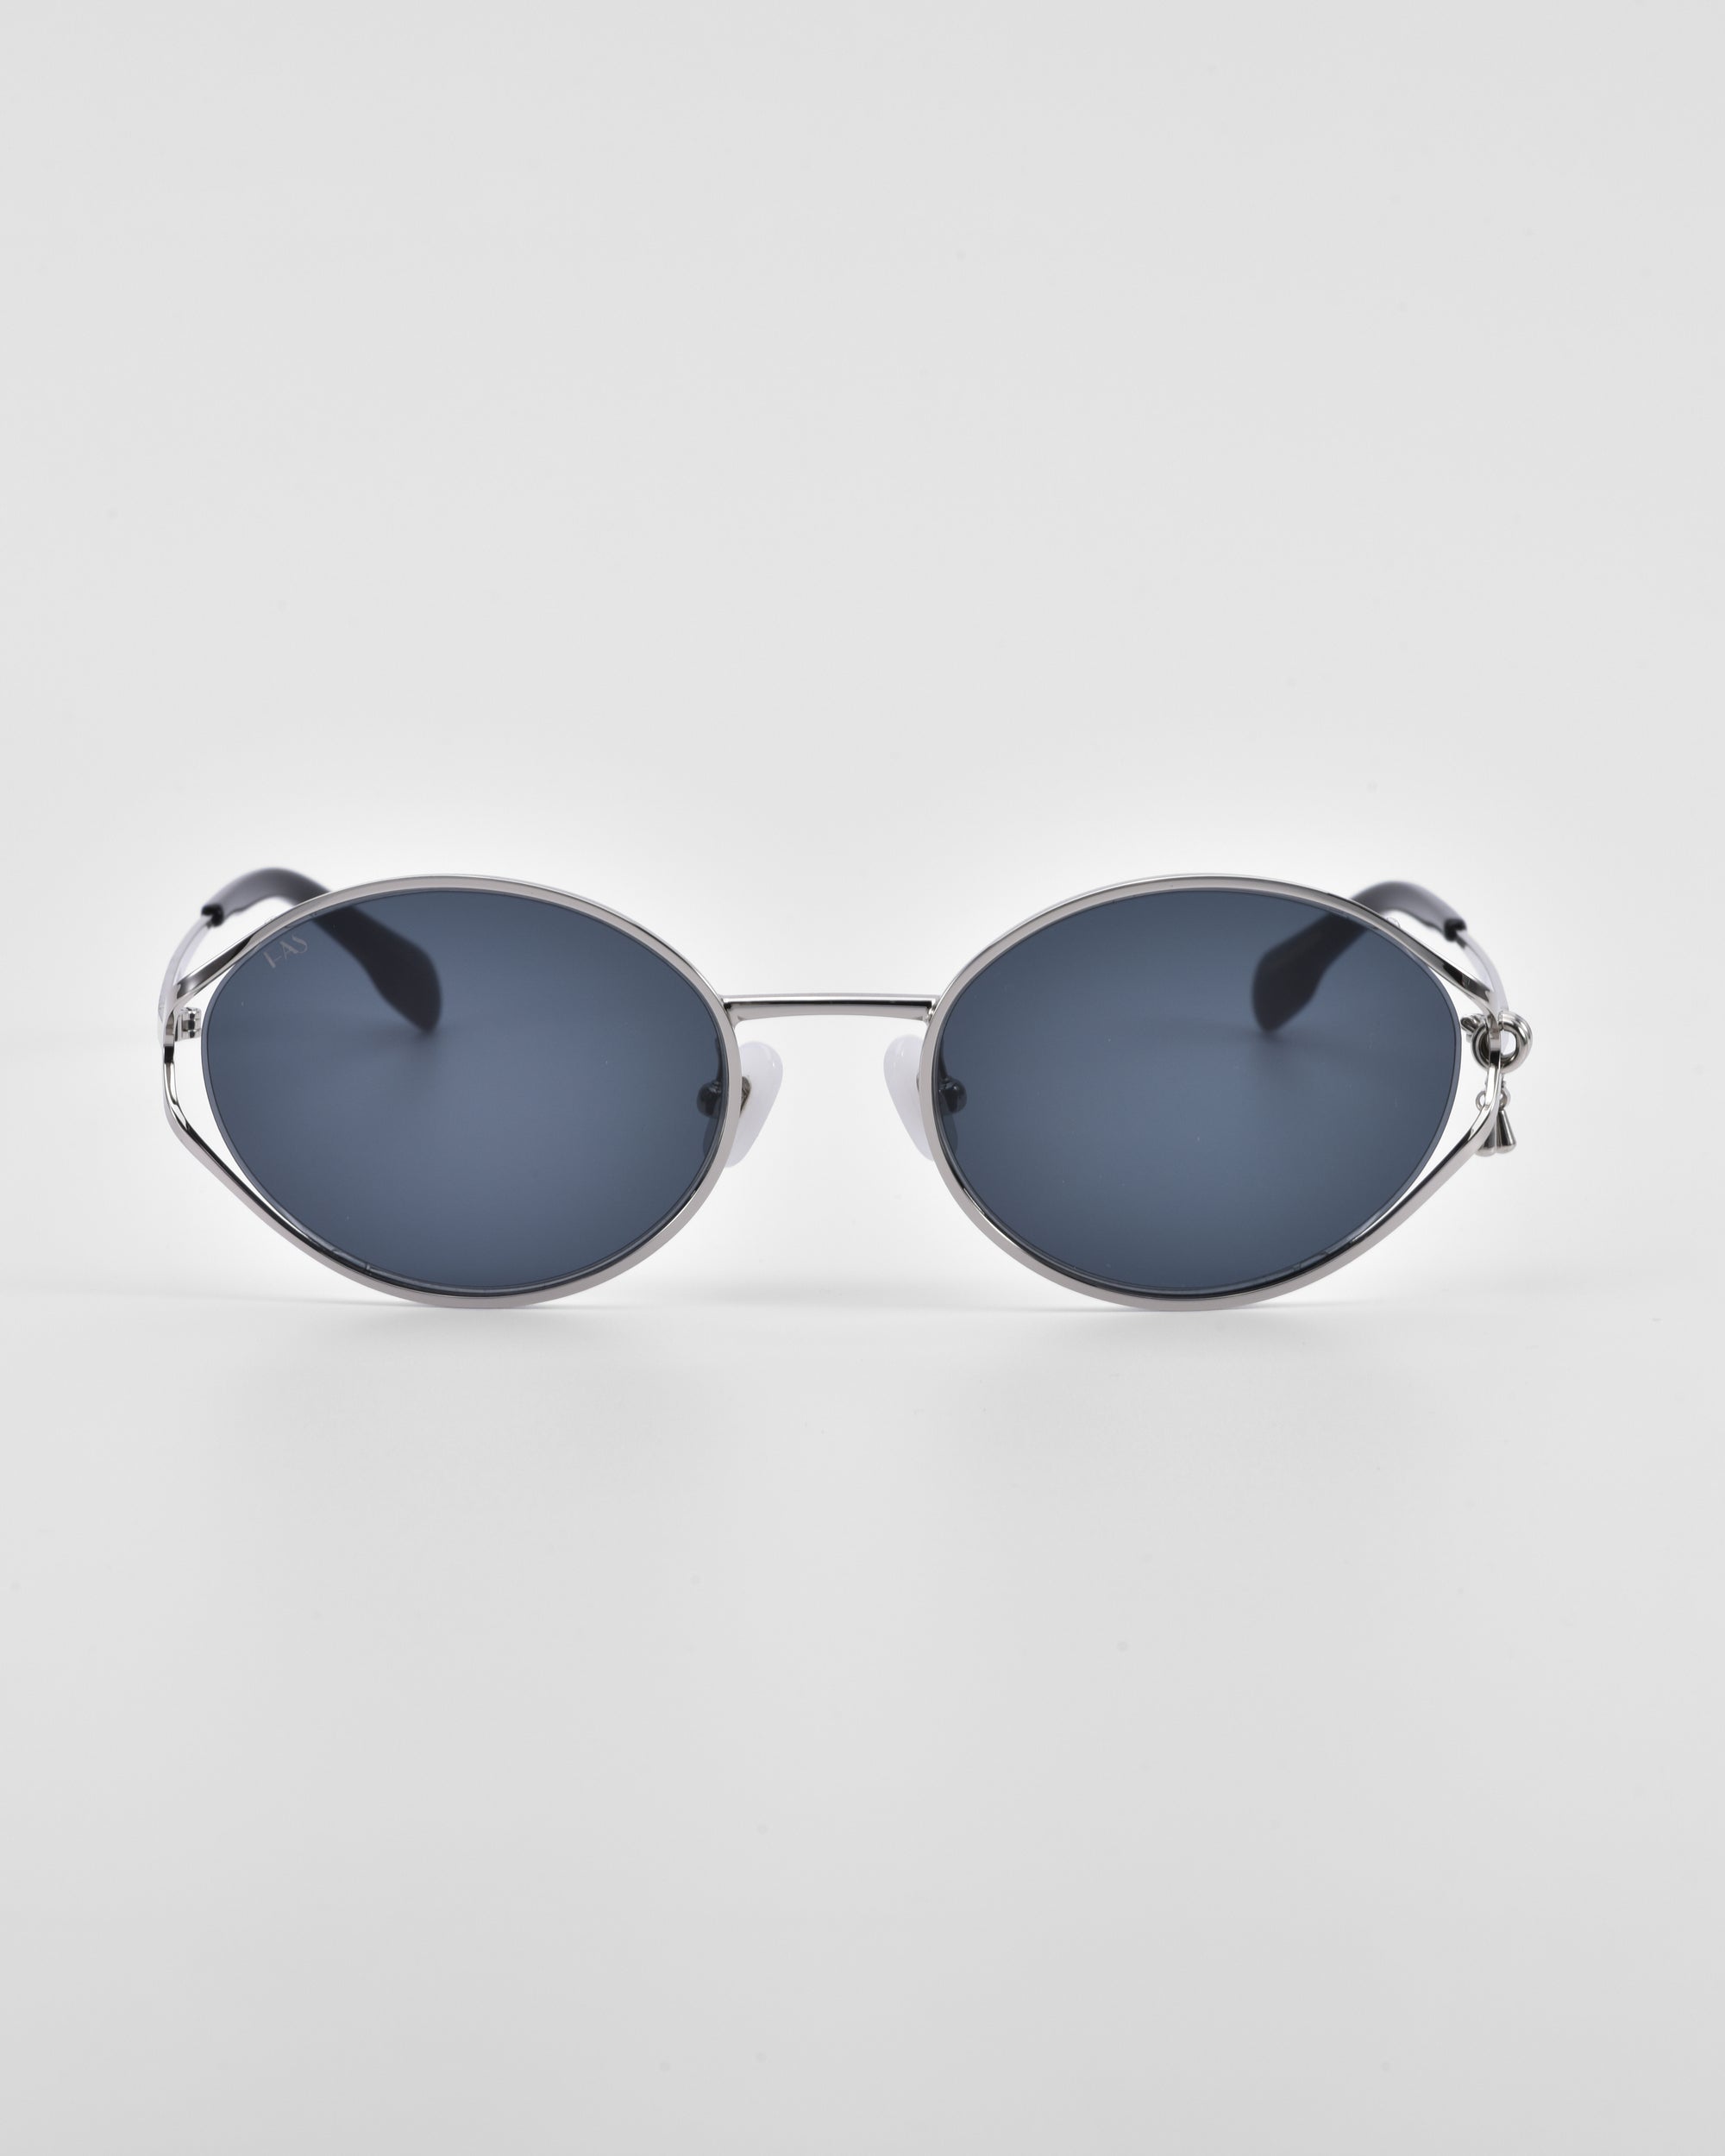 A pair of For Art&#39;s Sake® &quot;Sky&quot; sunglasses features oval-shaped, dark lenses set in a sleek silver frame, centered against a plain white background. The reflective lenses are complemented by thin, minimalist temples and natural jade-stone nose pads for added comfort and elegance.